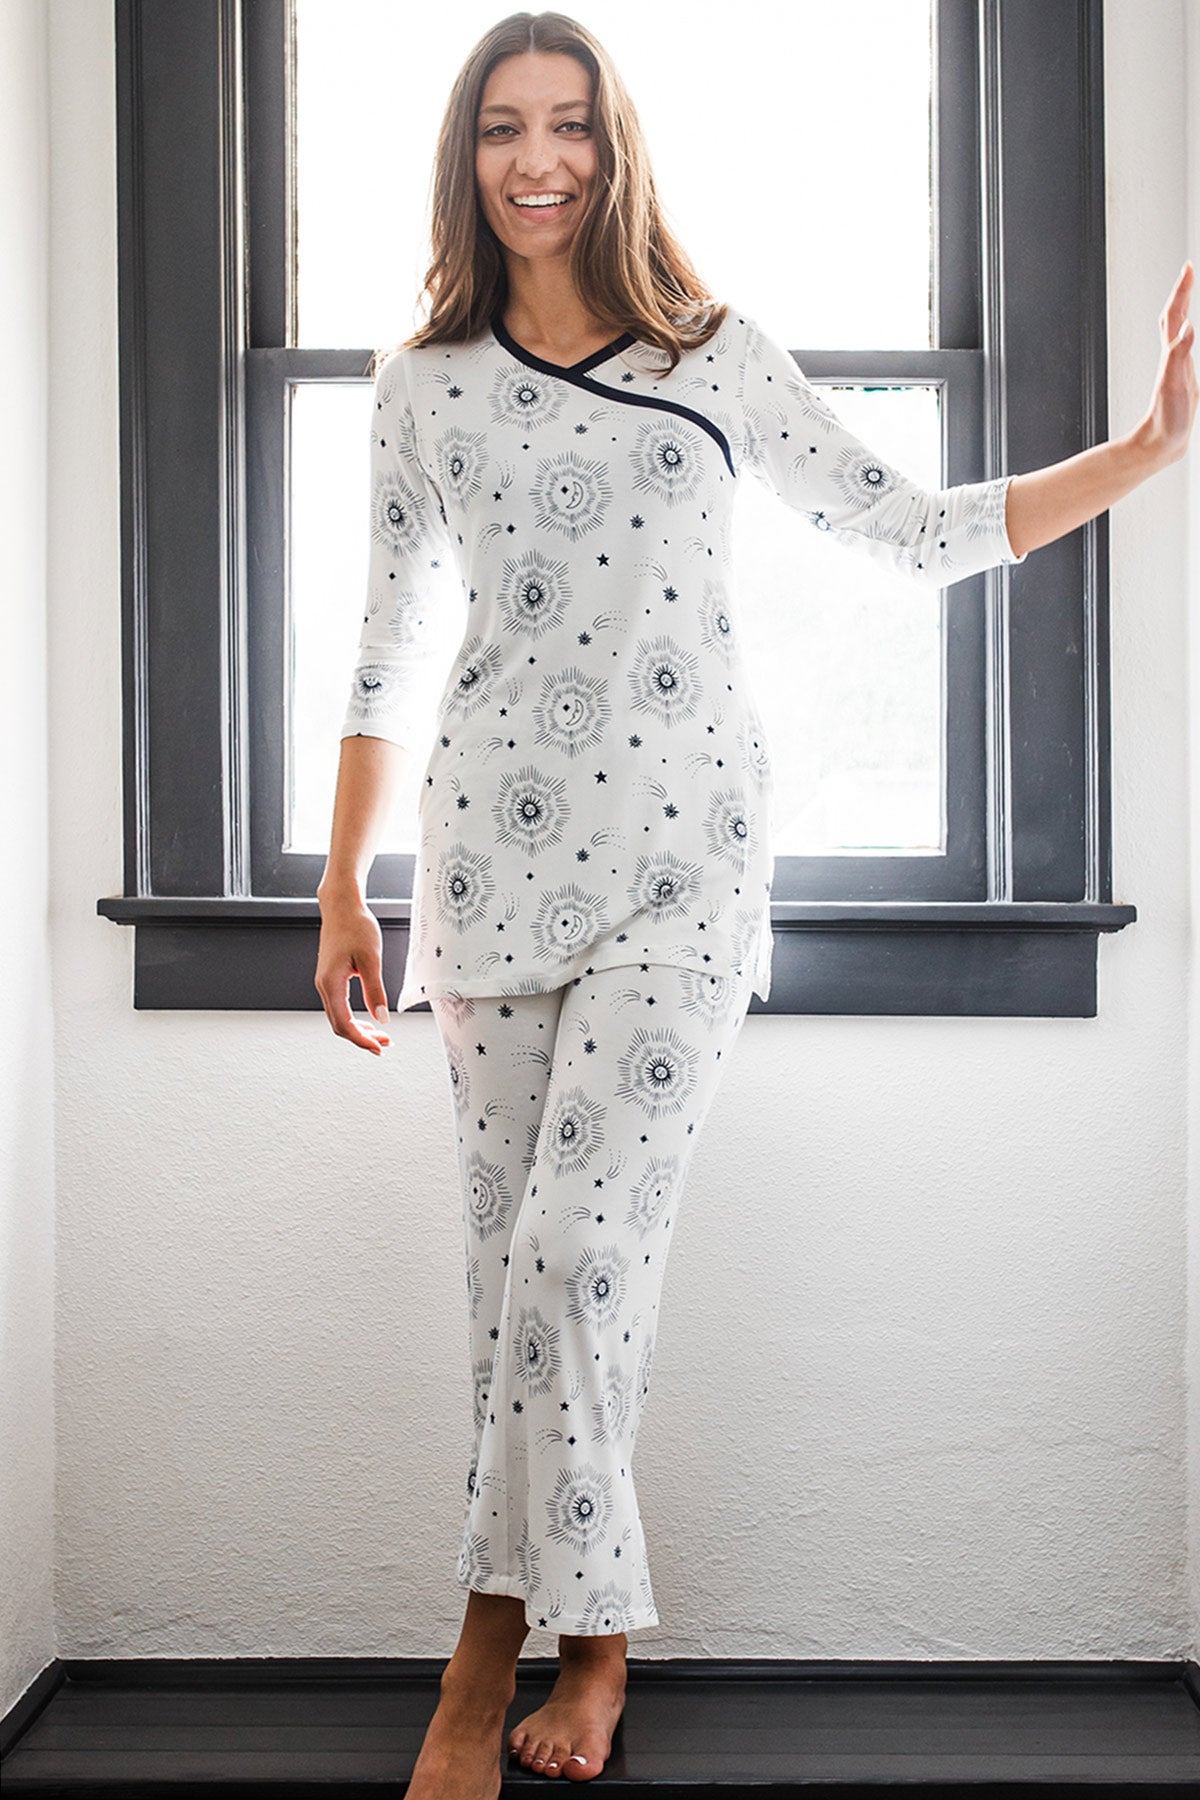 A woman standing in front of a window and leaning against a wall while smiling, wearing Yala Haley Crossover Front 3/4 Sleeve Bamboo Pajama Set in Celestial Print